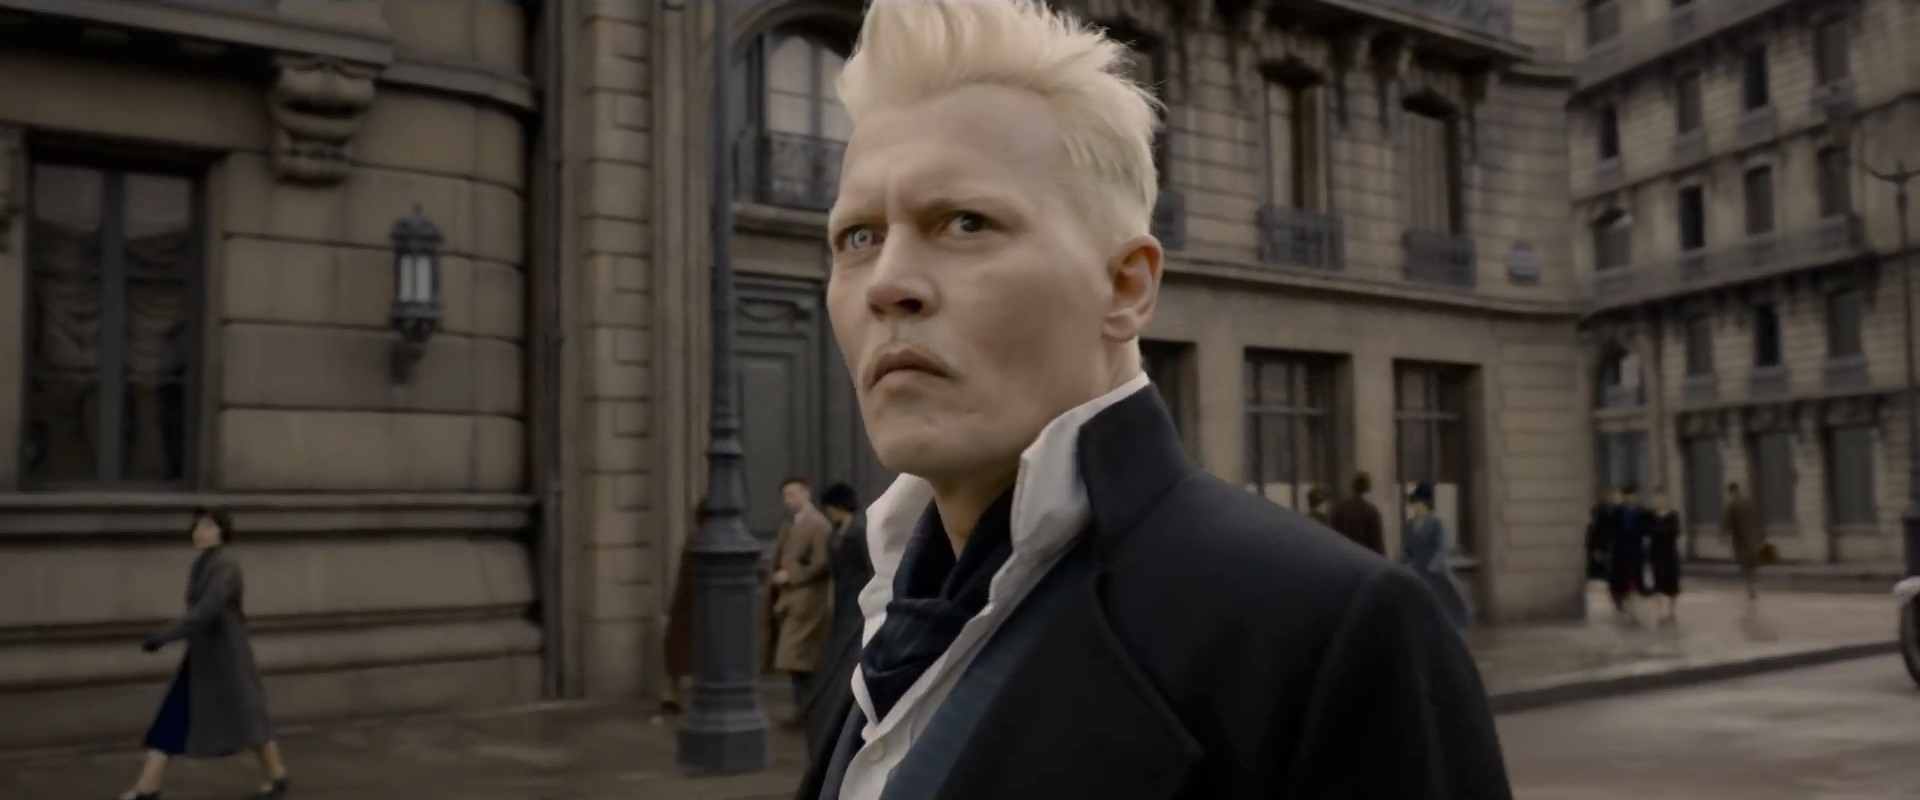 Fantastic Beasts The Crimes of Grindelwald Comic Con Trailer SDCC 2018